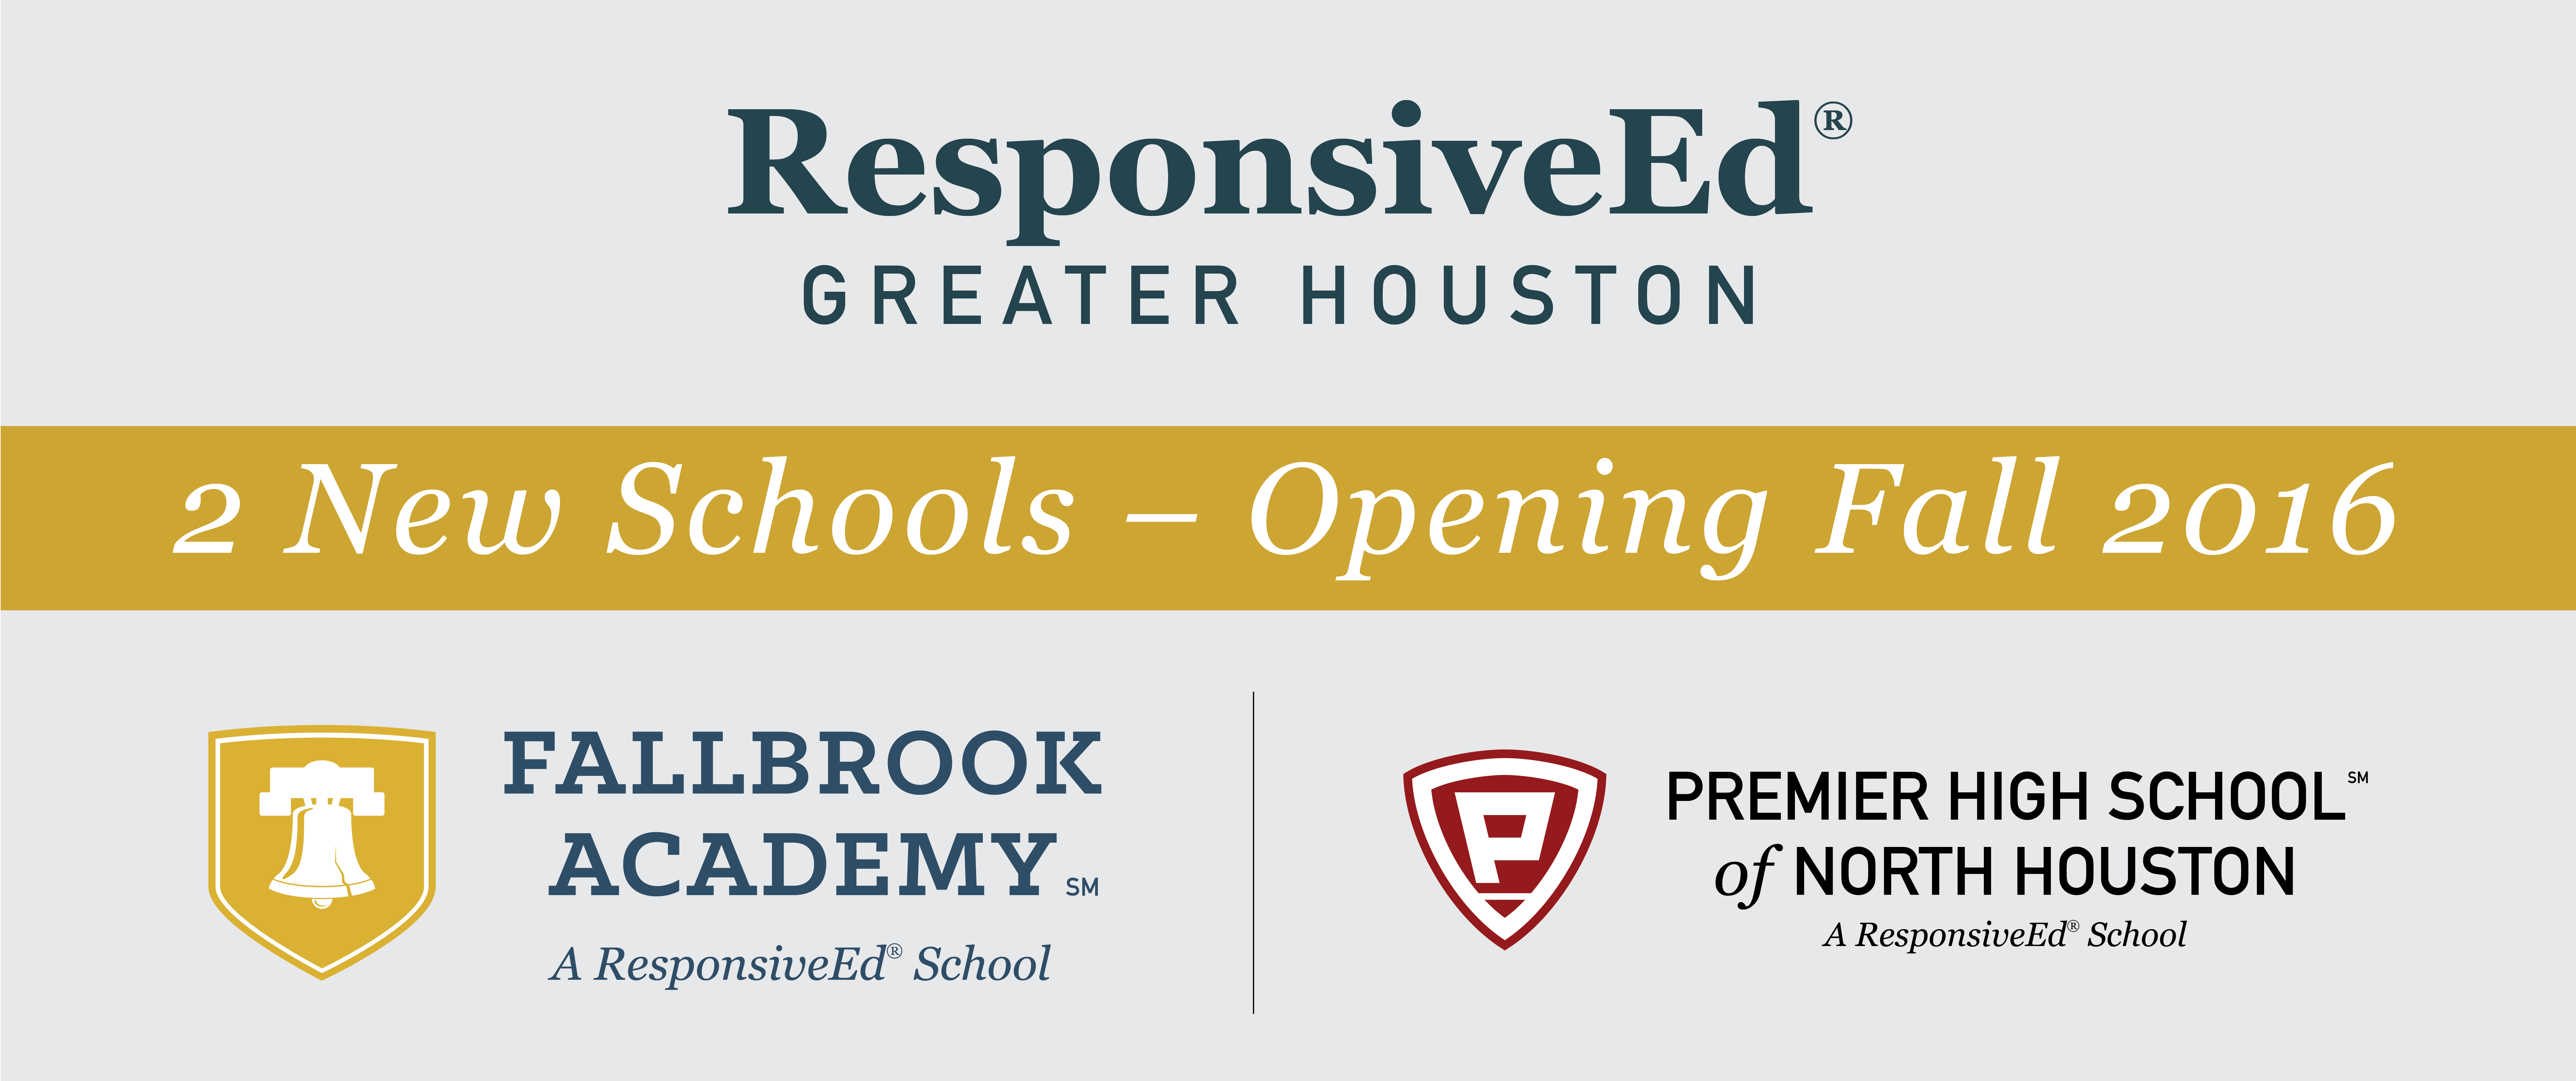 ResponsiveEd to launch two new charter schools in North Houston to serve K-12 students